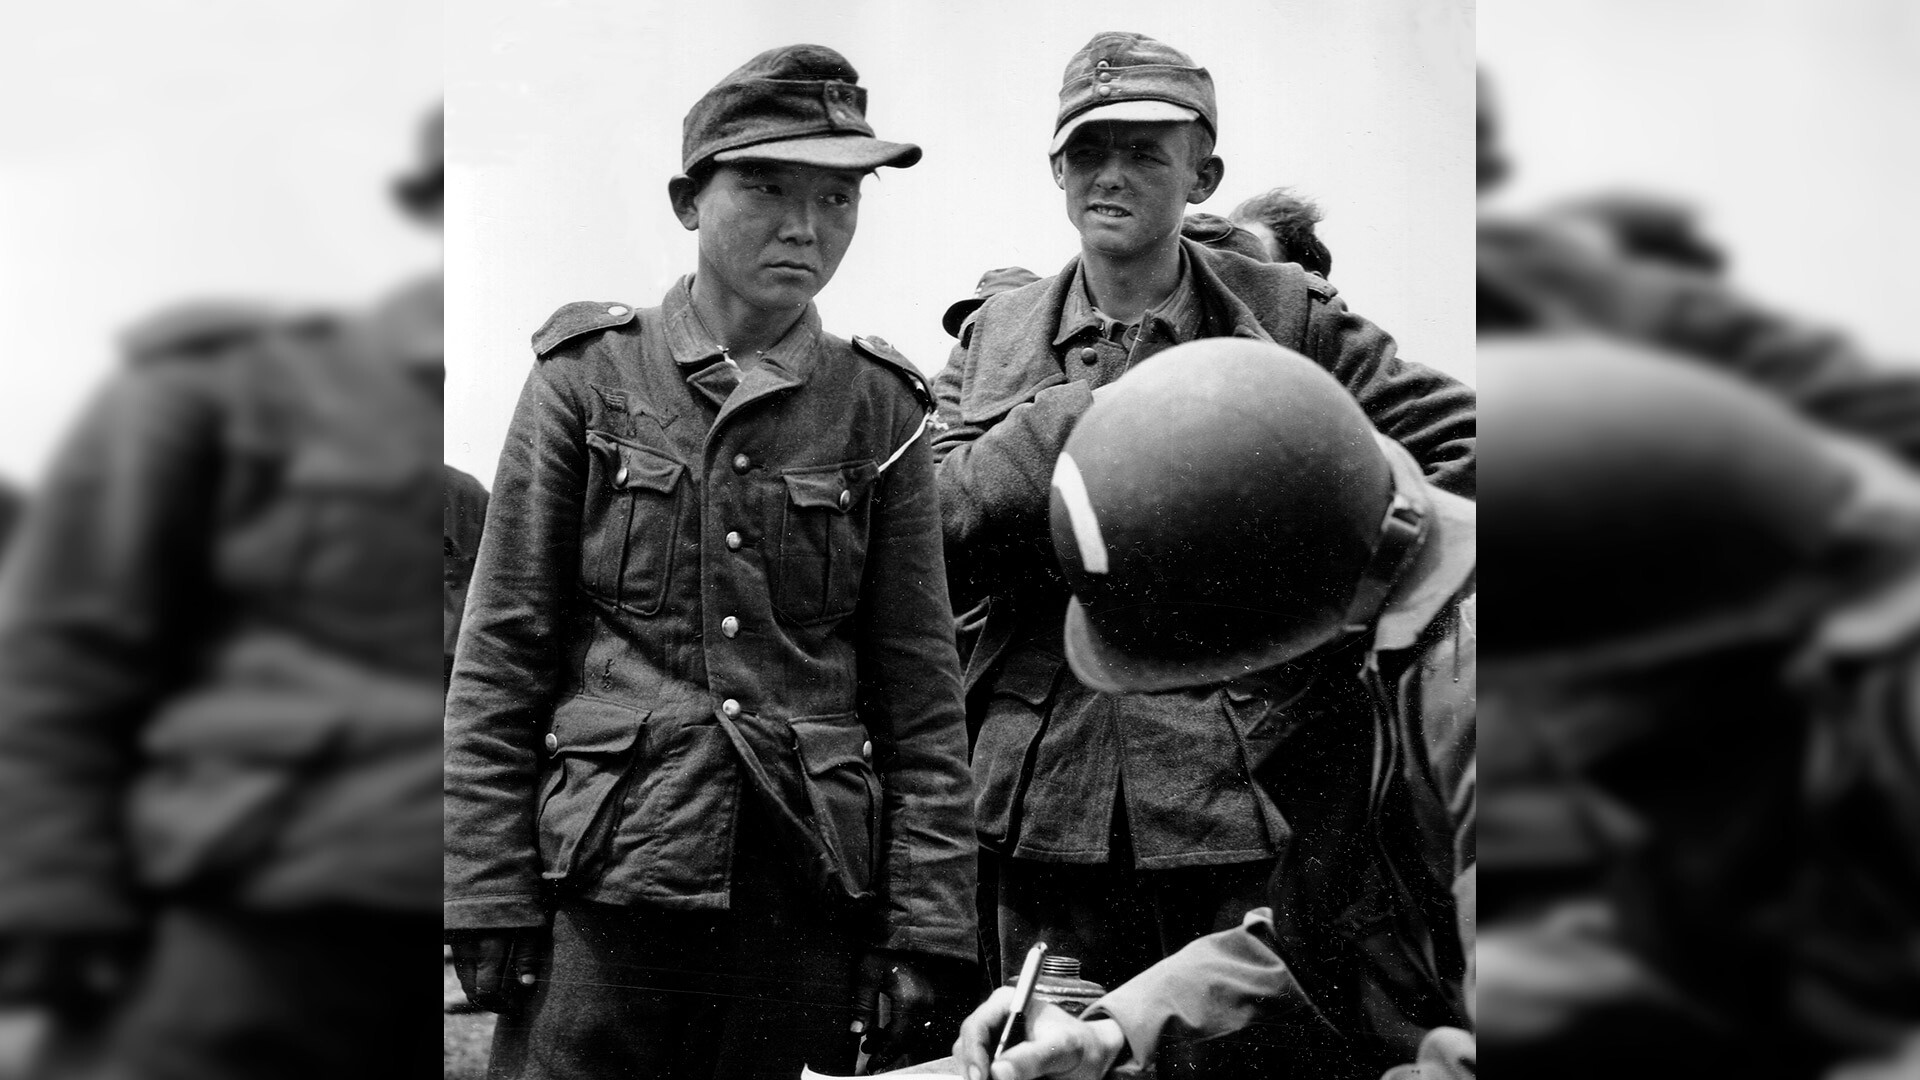 The photo is presumably of Yang Kyoungjong, taken prisoner by the Americans in 1944.